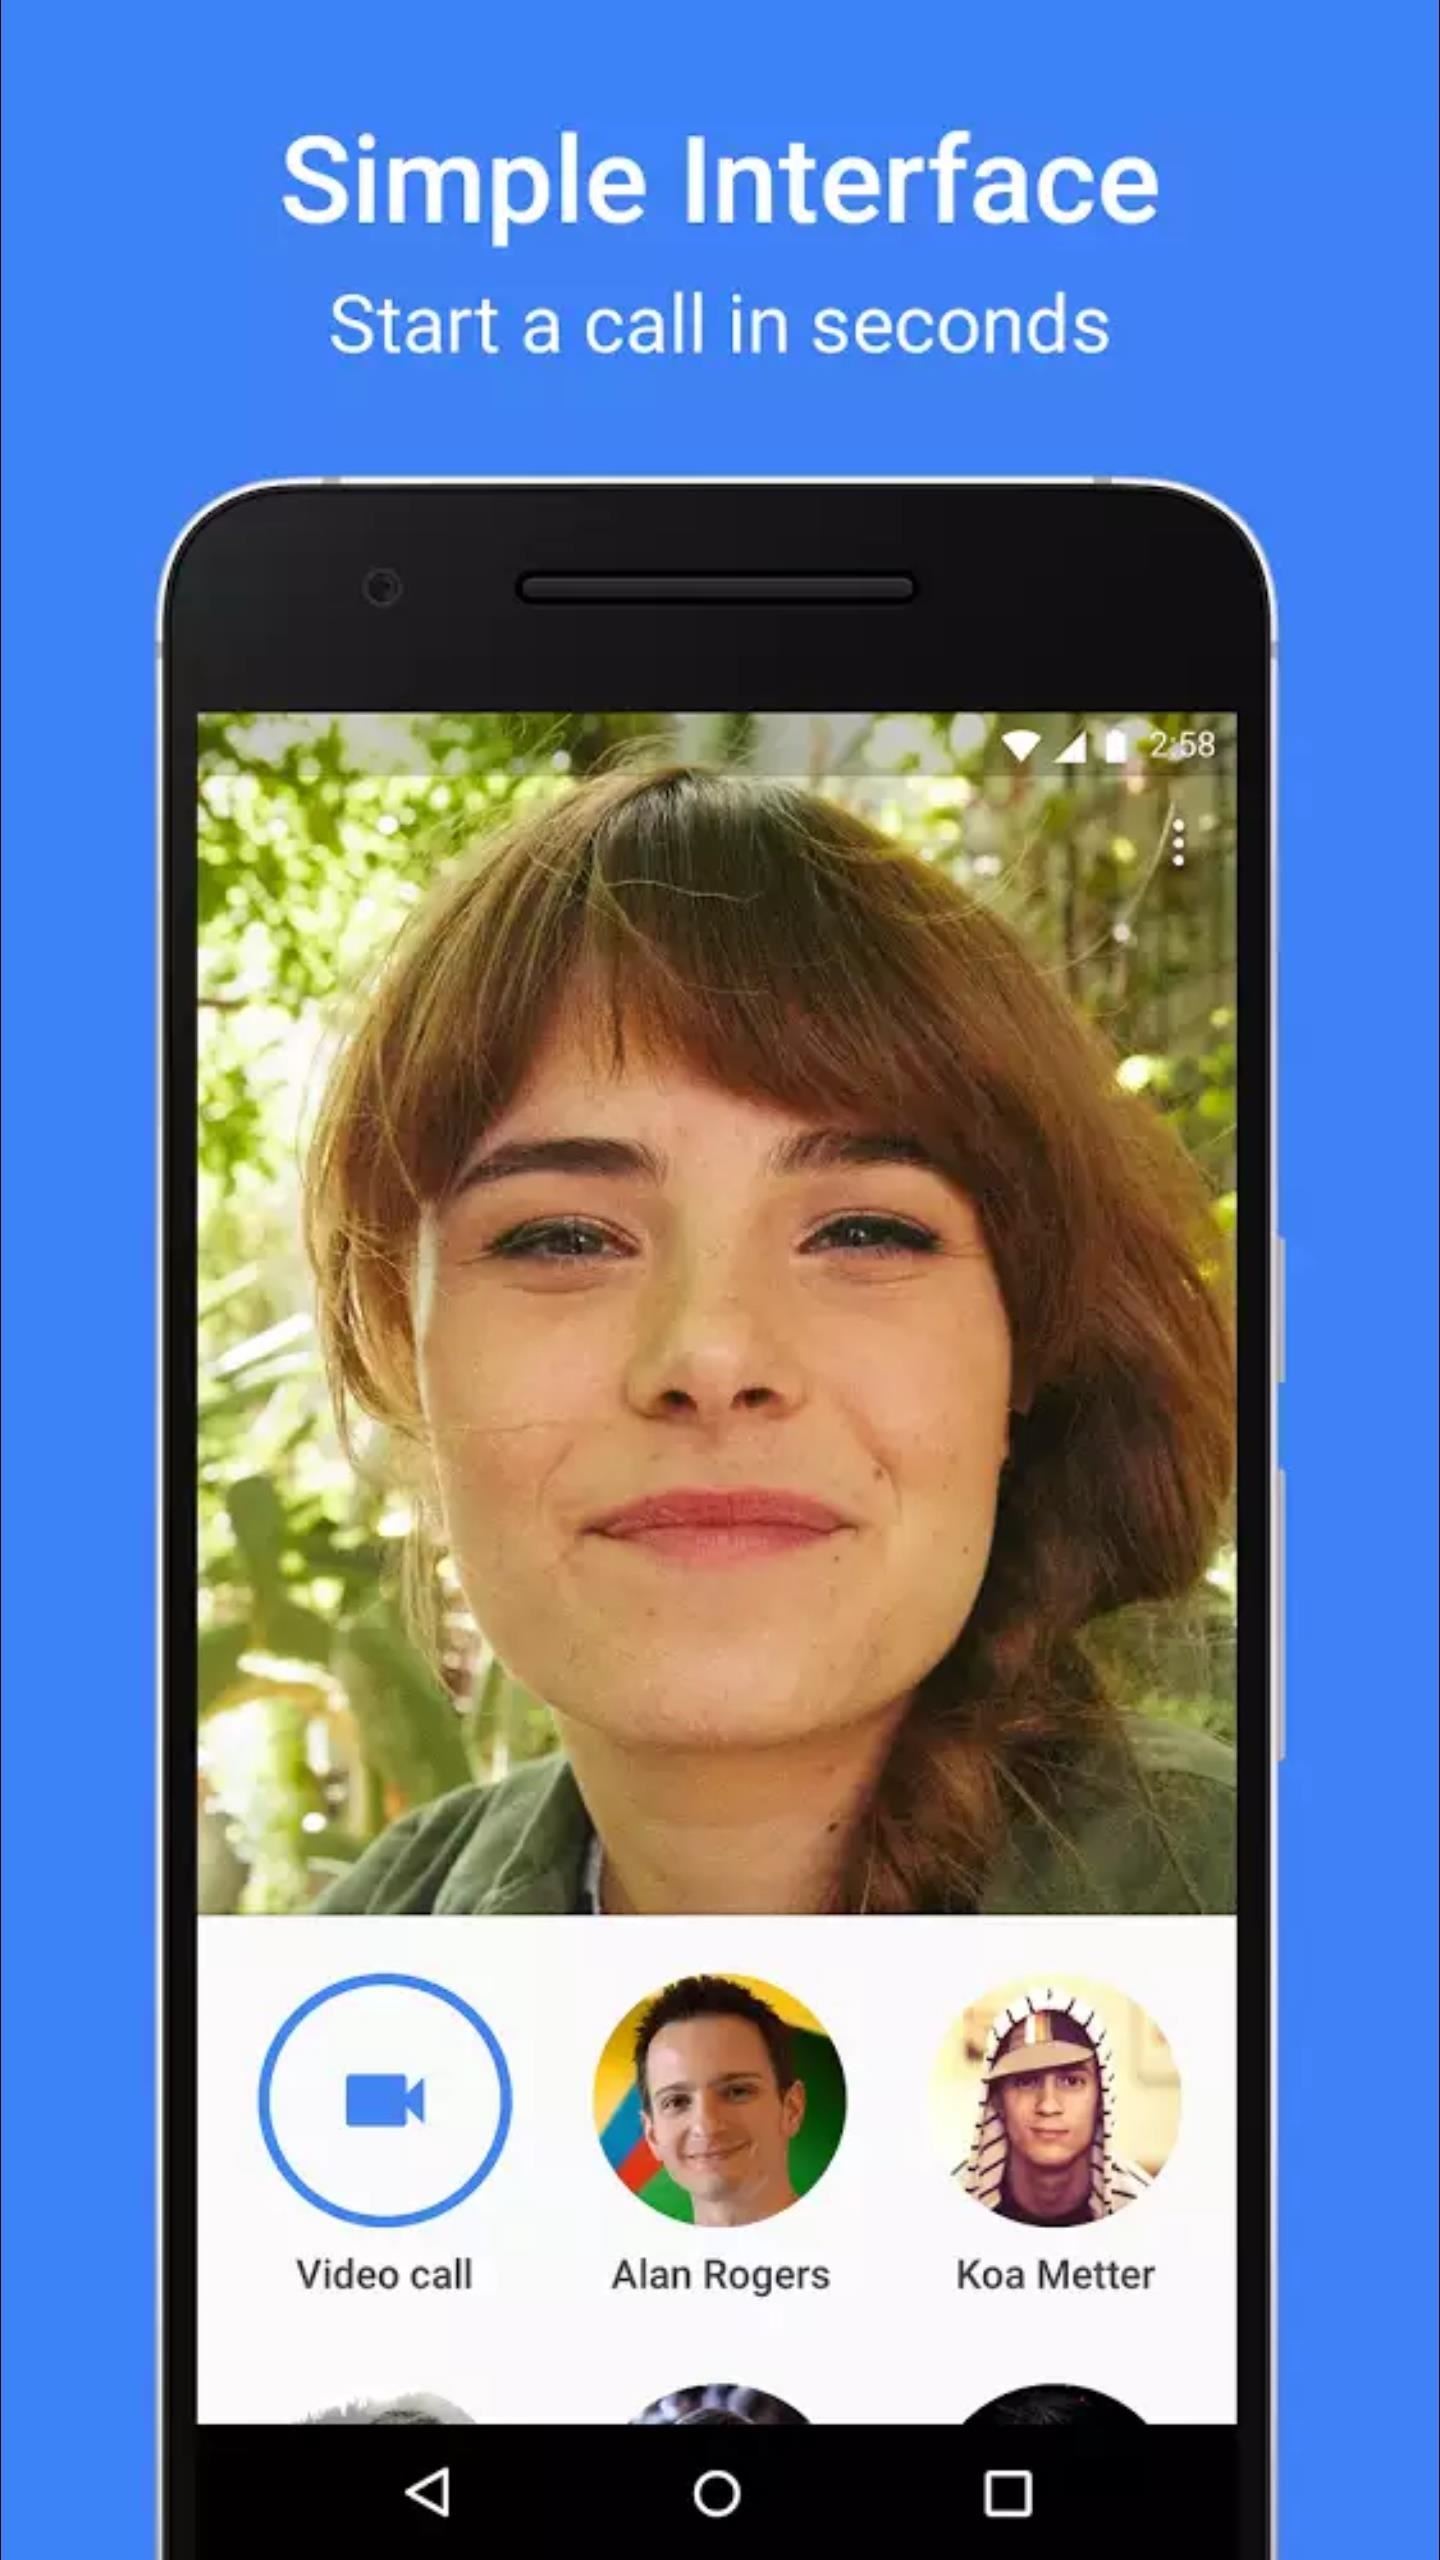 Google Finally Launches Duo—Here's Why You Should Give the New Video Chat App a Try